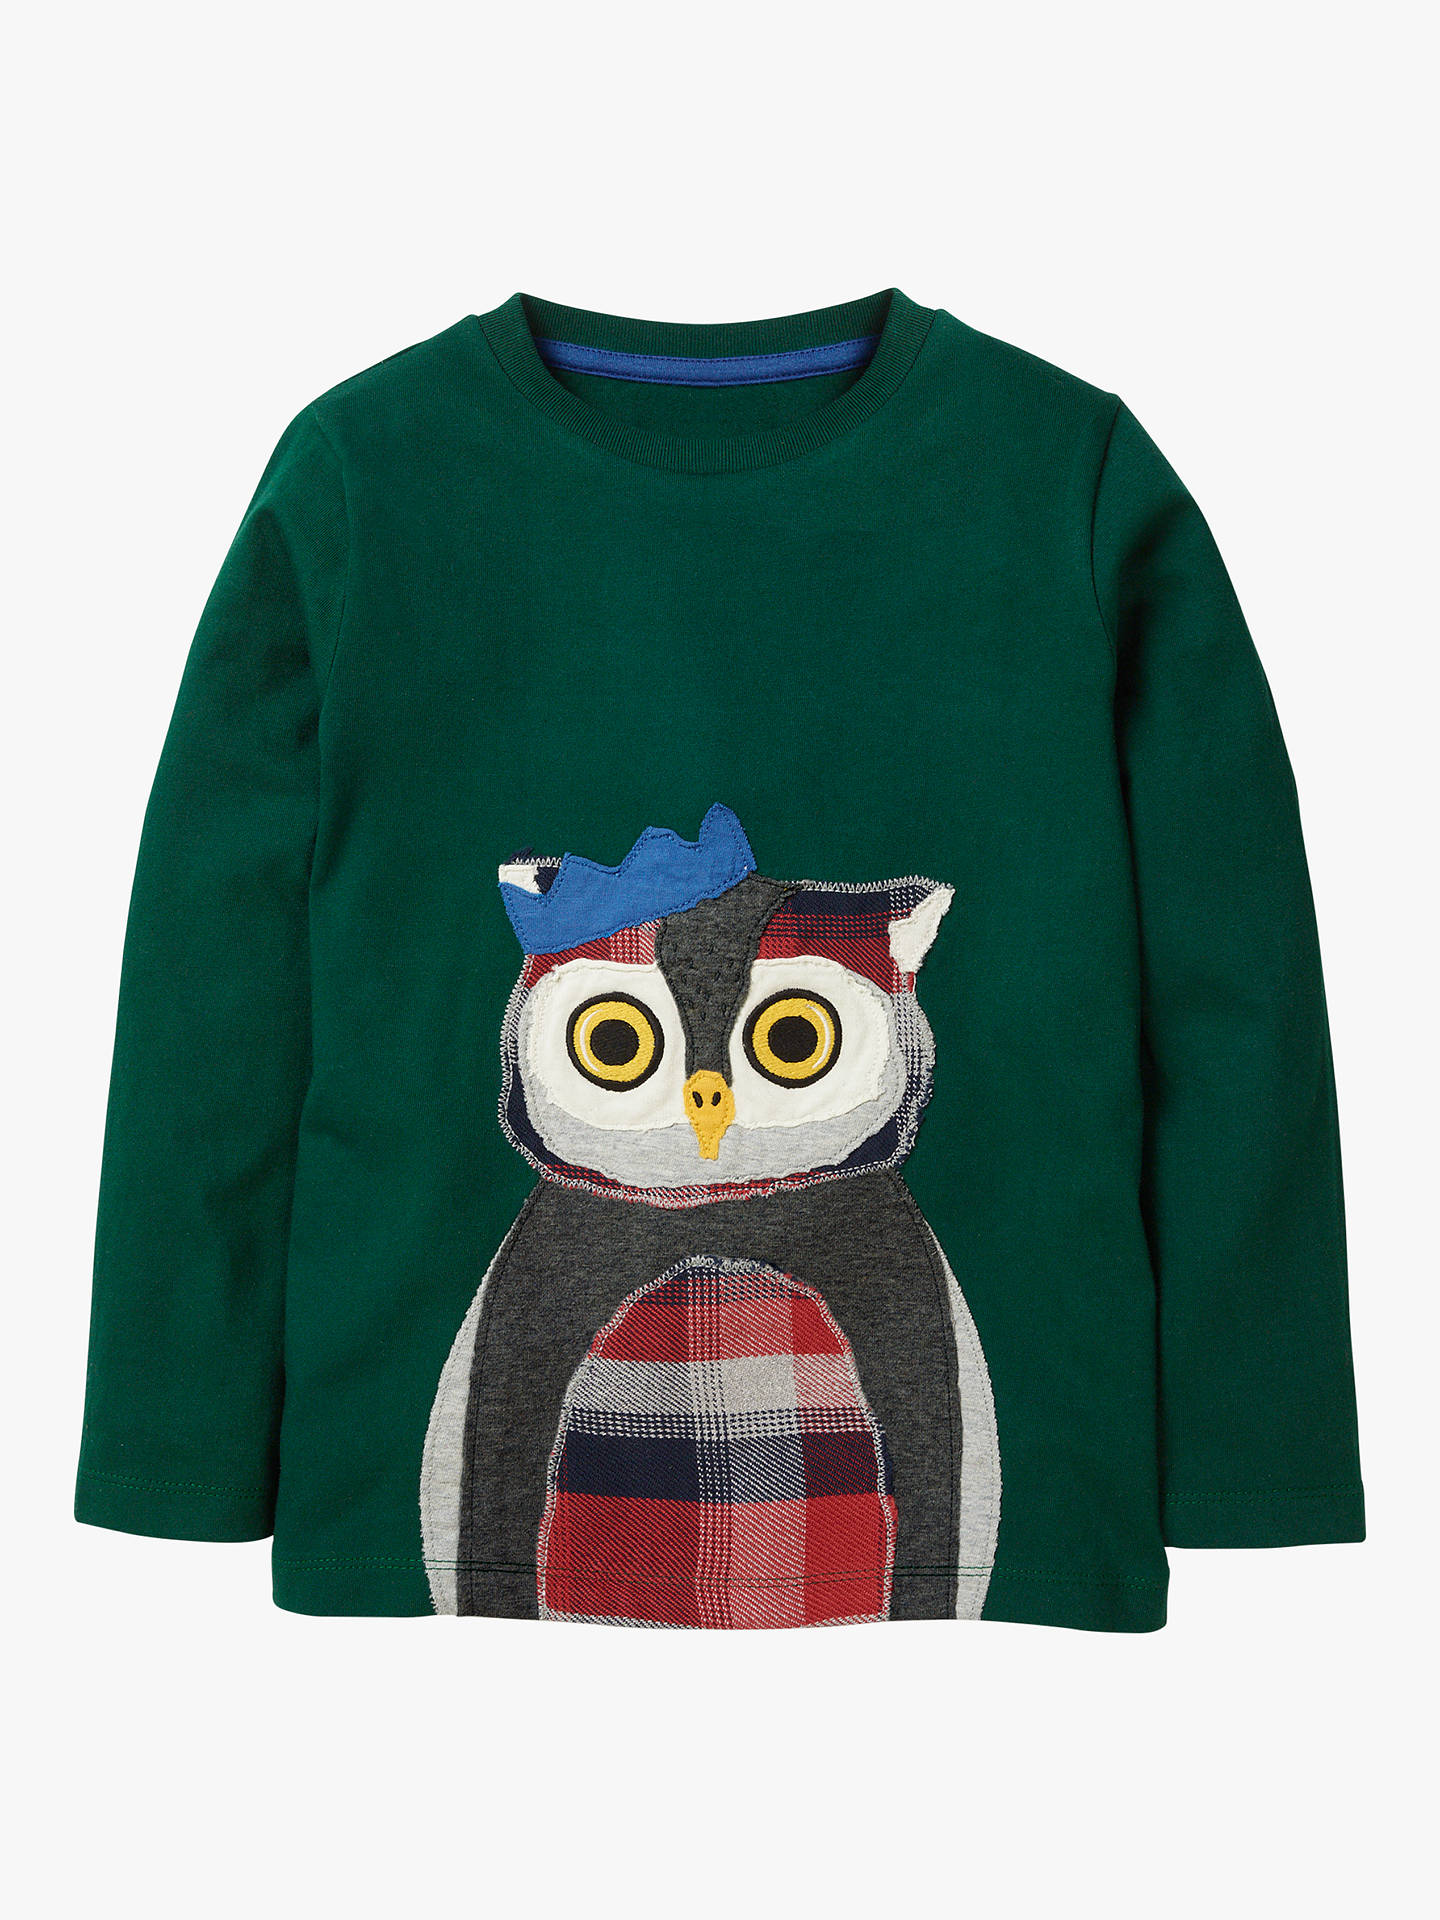 Mini Boden Boys Applique long sleeve top cotton UK Size 3-4 years Brand new 